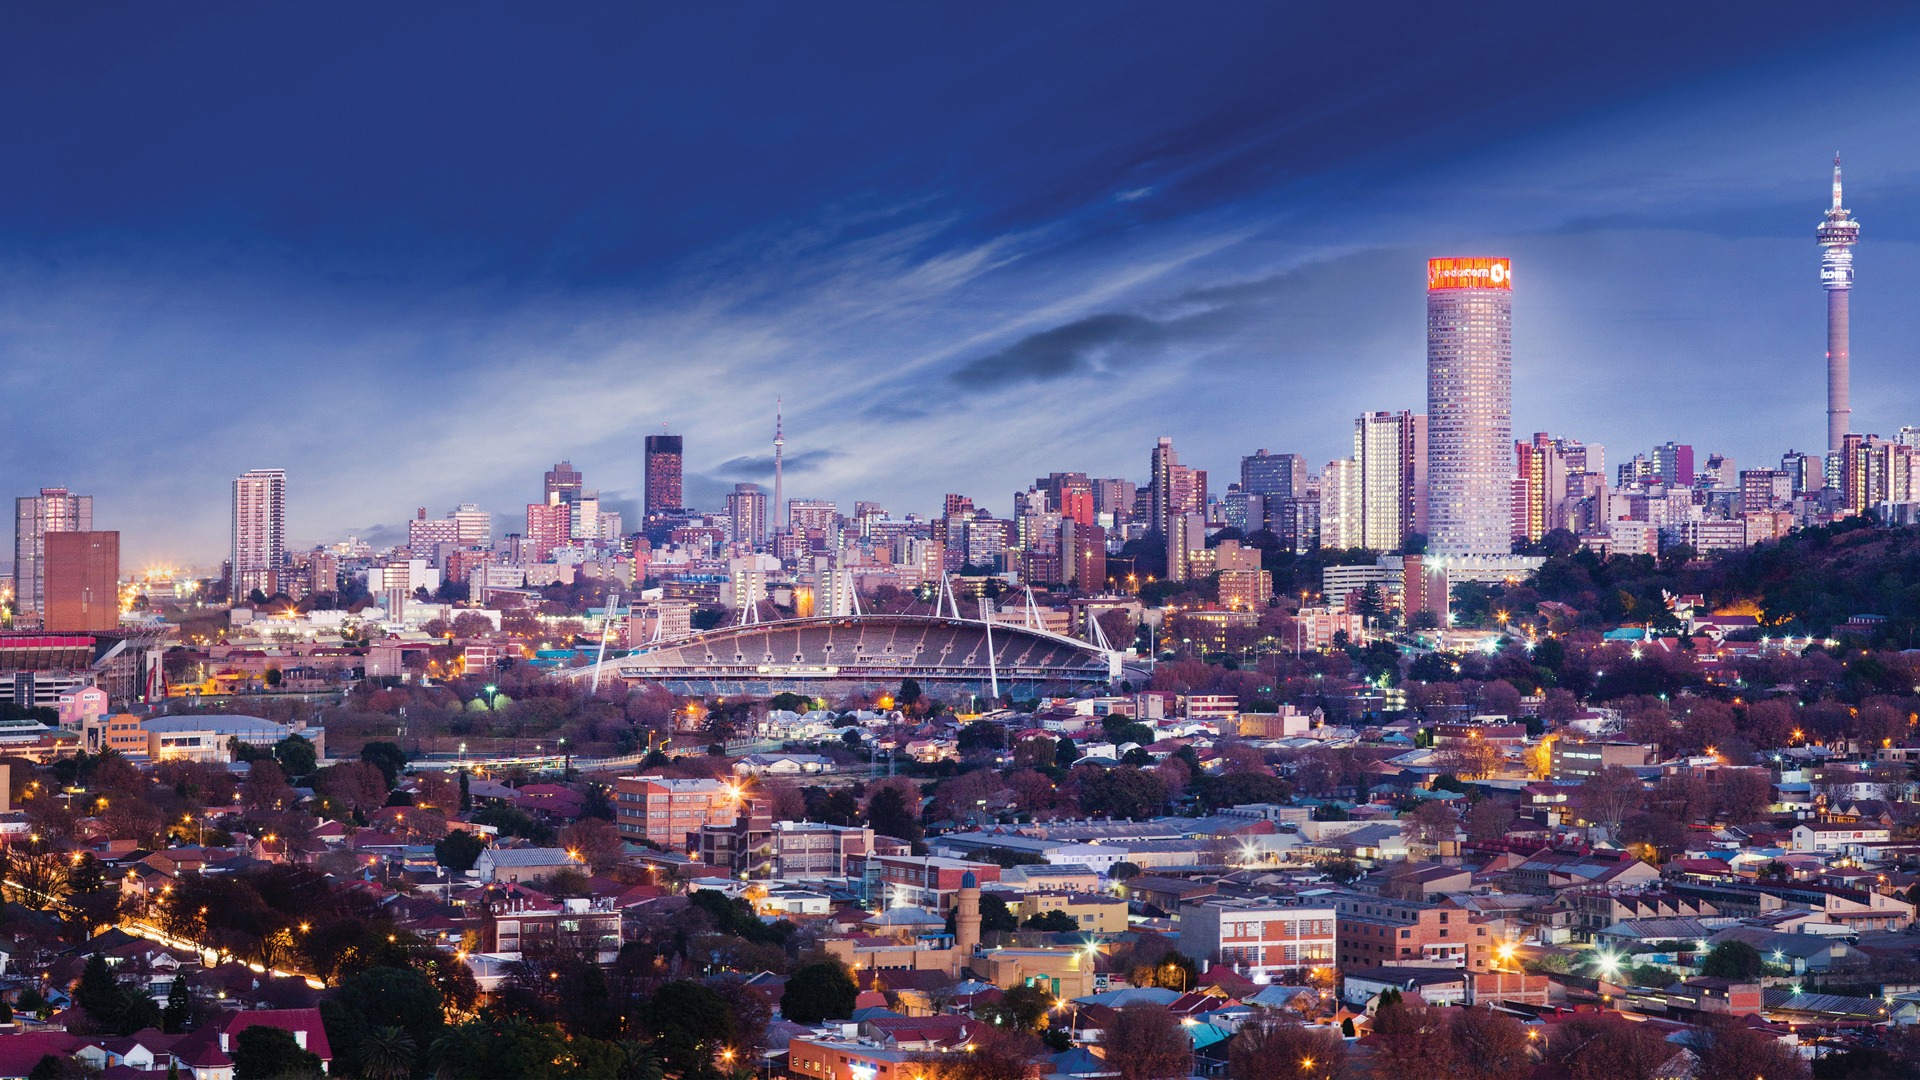 32 Facts about Johannesburg - Facts.net